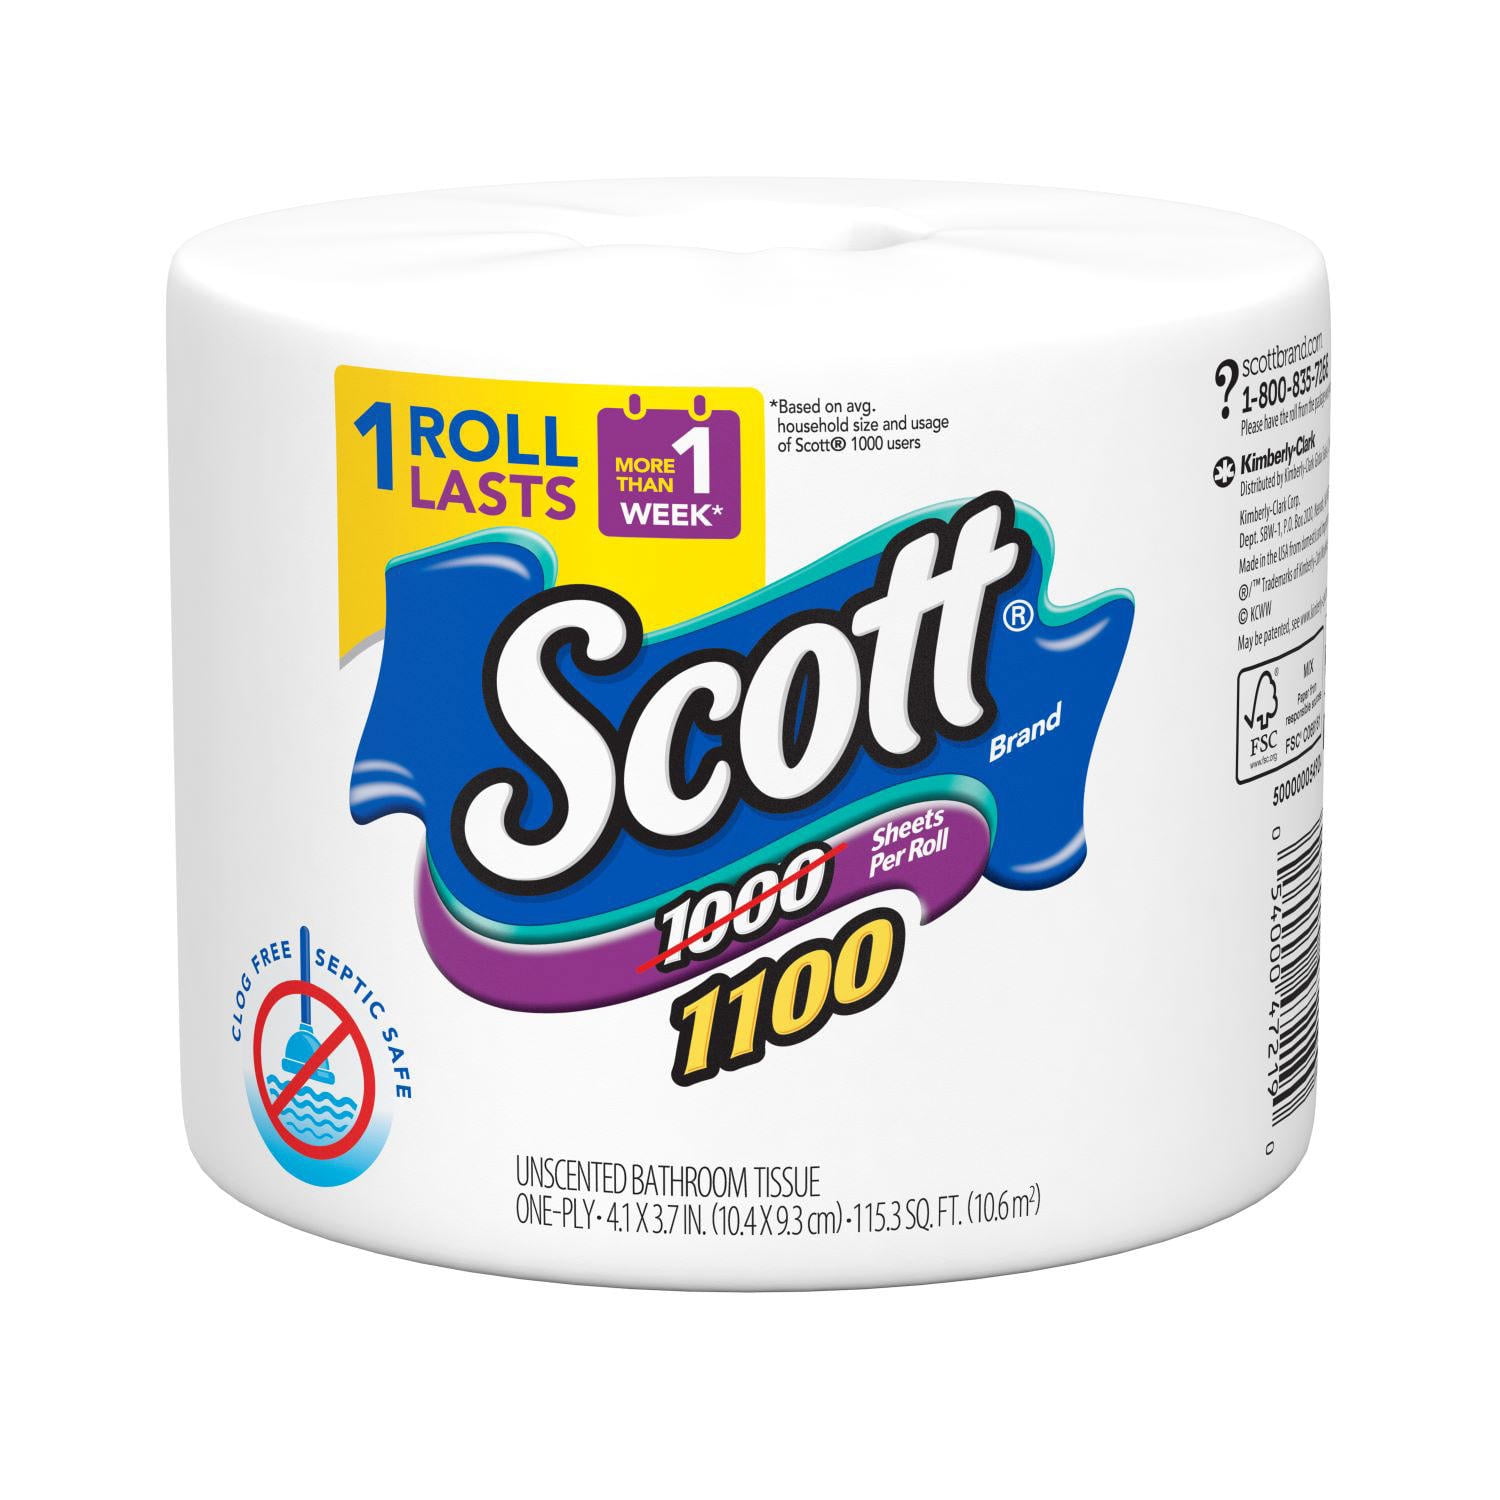 Scott 1100 Unscented Bath Tissue, 1-ply (36 Rolls = 1100 Sheets Per Roll) - Individually Wrapped Toilet Paper - 1